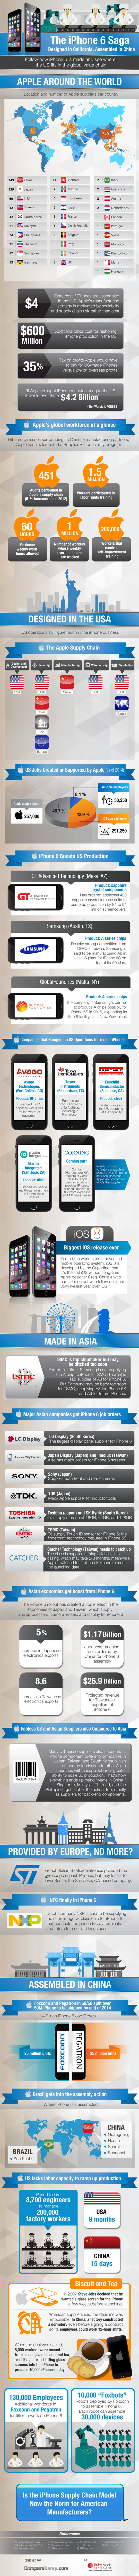 How iPhone Is Made: Comparison Of Apple's Manufacturing Process